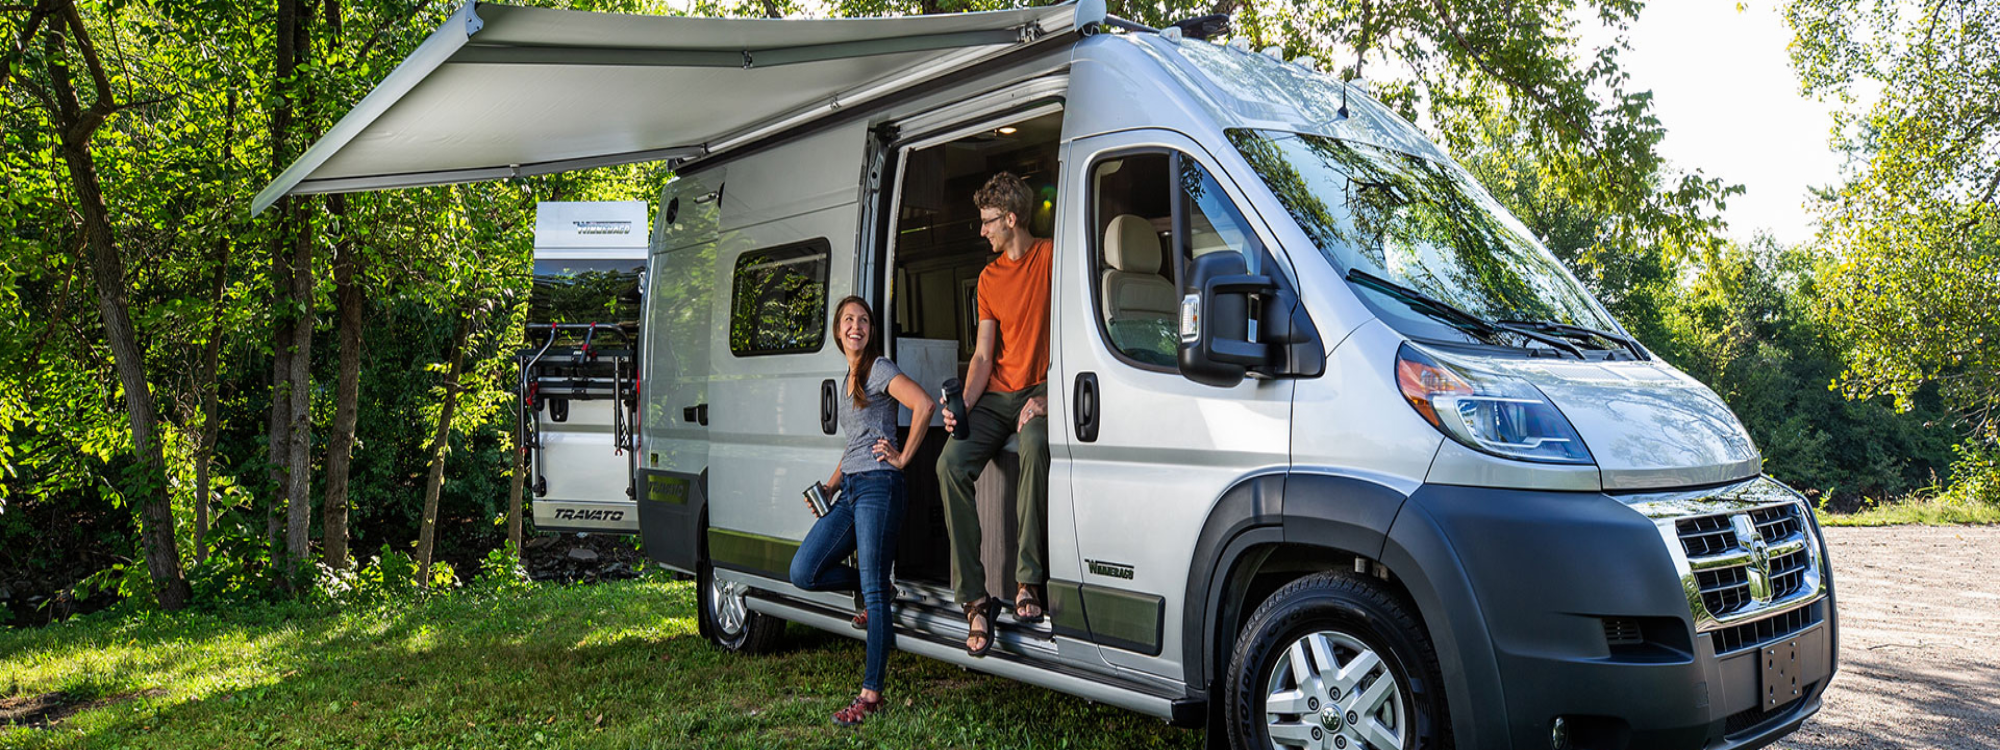 Couple hanging out inside their Travato camper van